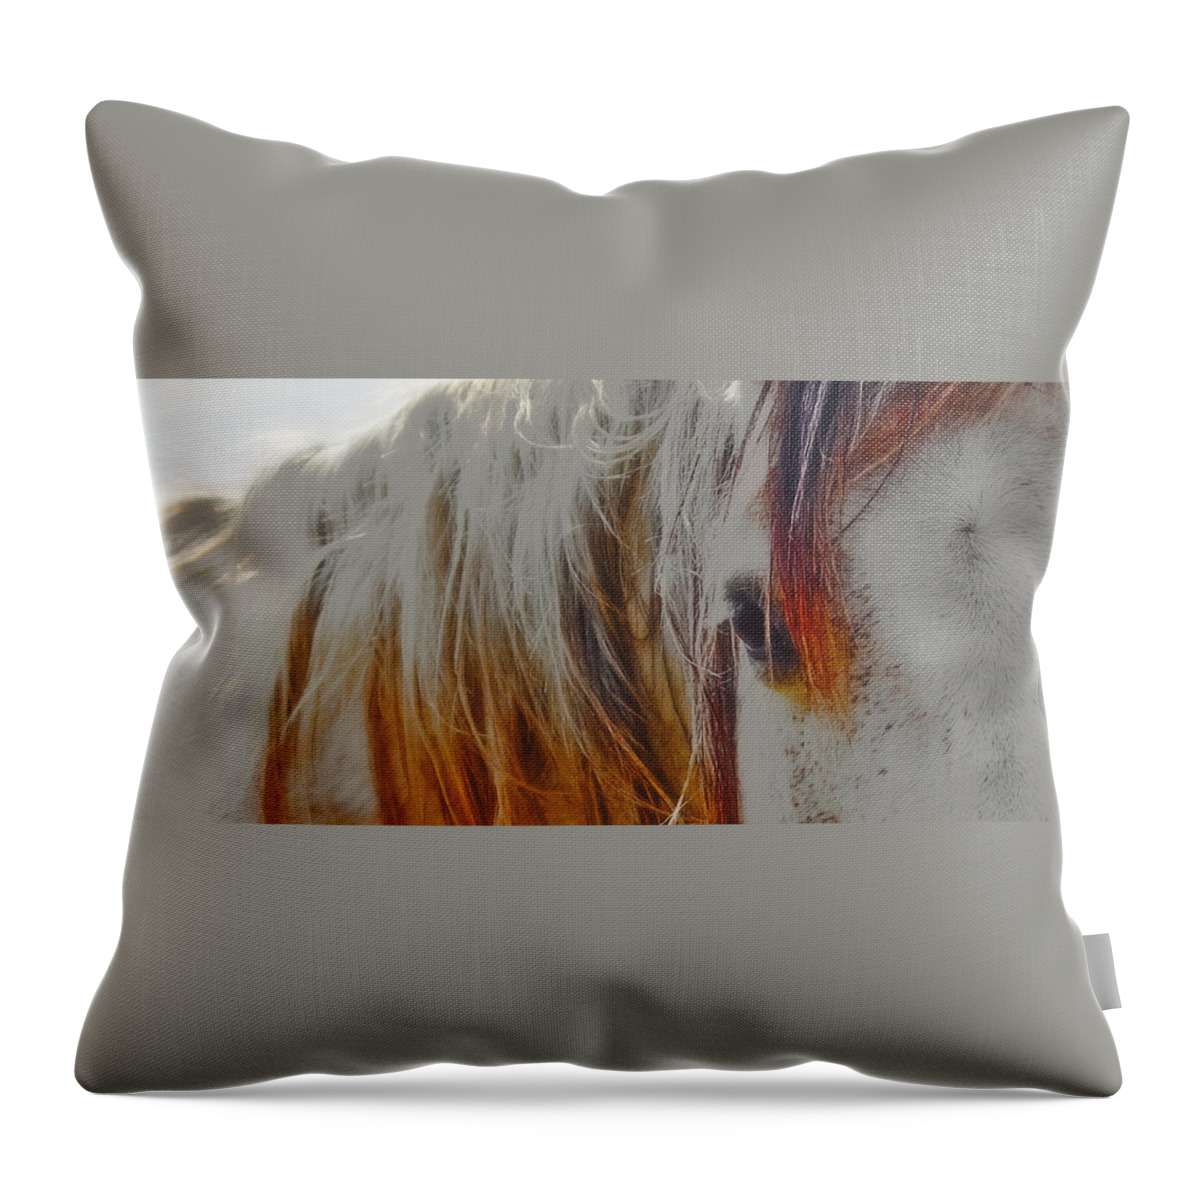 Retro Throw Pillow featuring the photograph Retro Sunlight and Grey by Amanda Smith